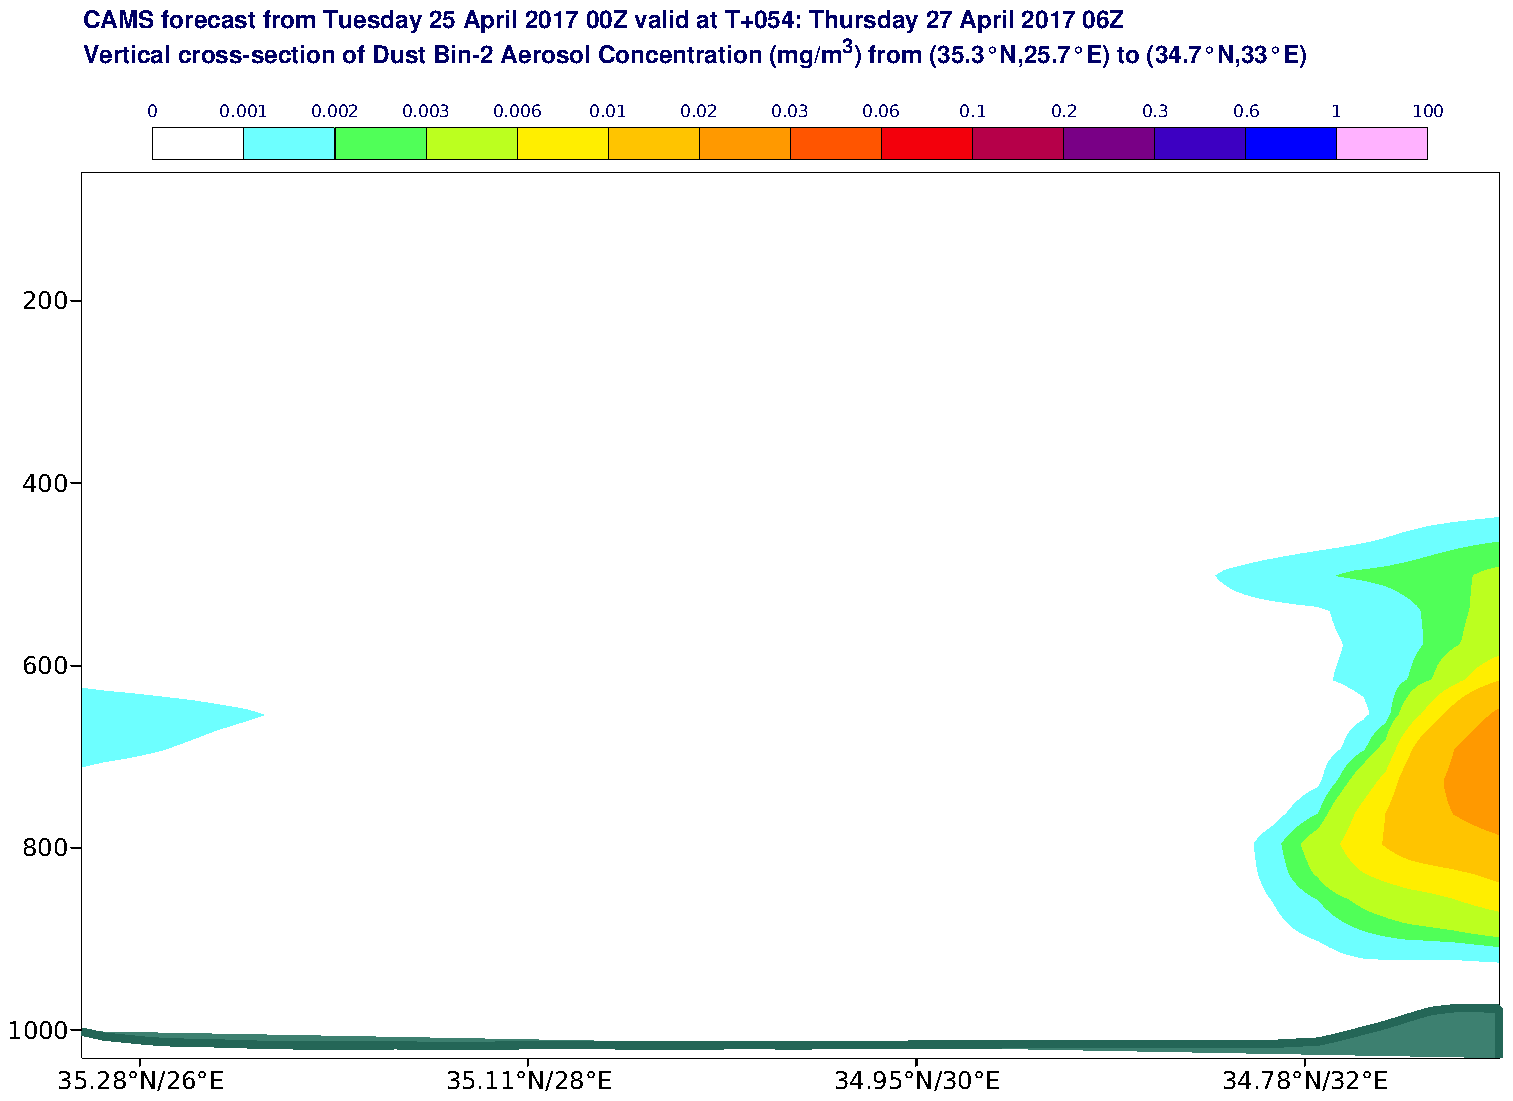 Vertical cross-section of Dust Bin-2 Aerosol Concentration (mg/m3) valid at T54 - 2017-04-27 06:00